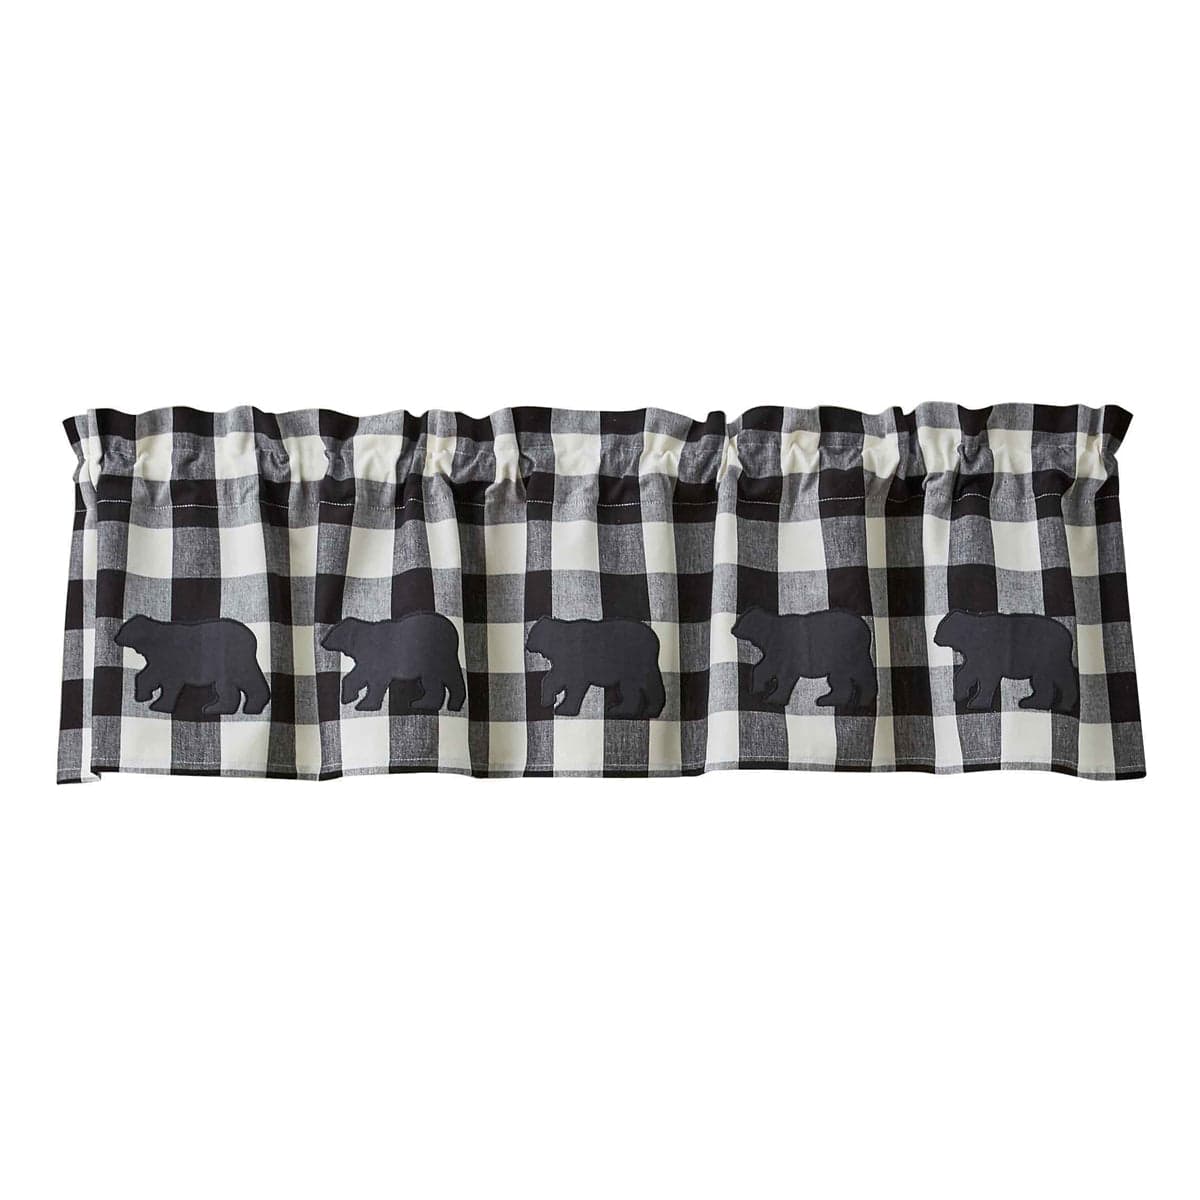 Wicklow Check in Black & Cream Bear Valance Lined-Park Designs-The Village Merchant